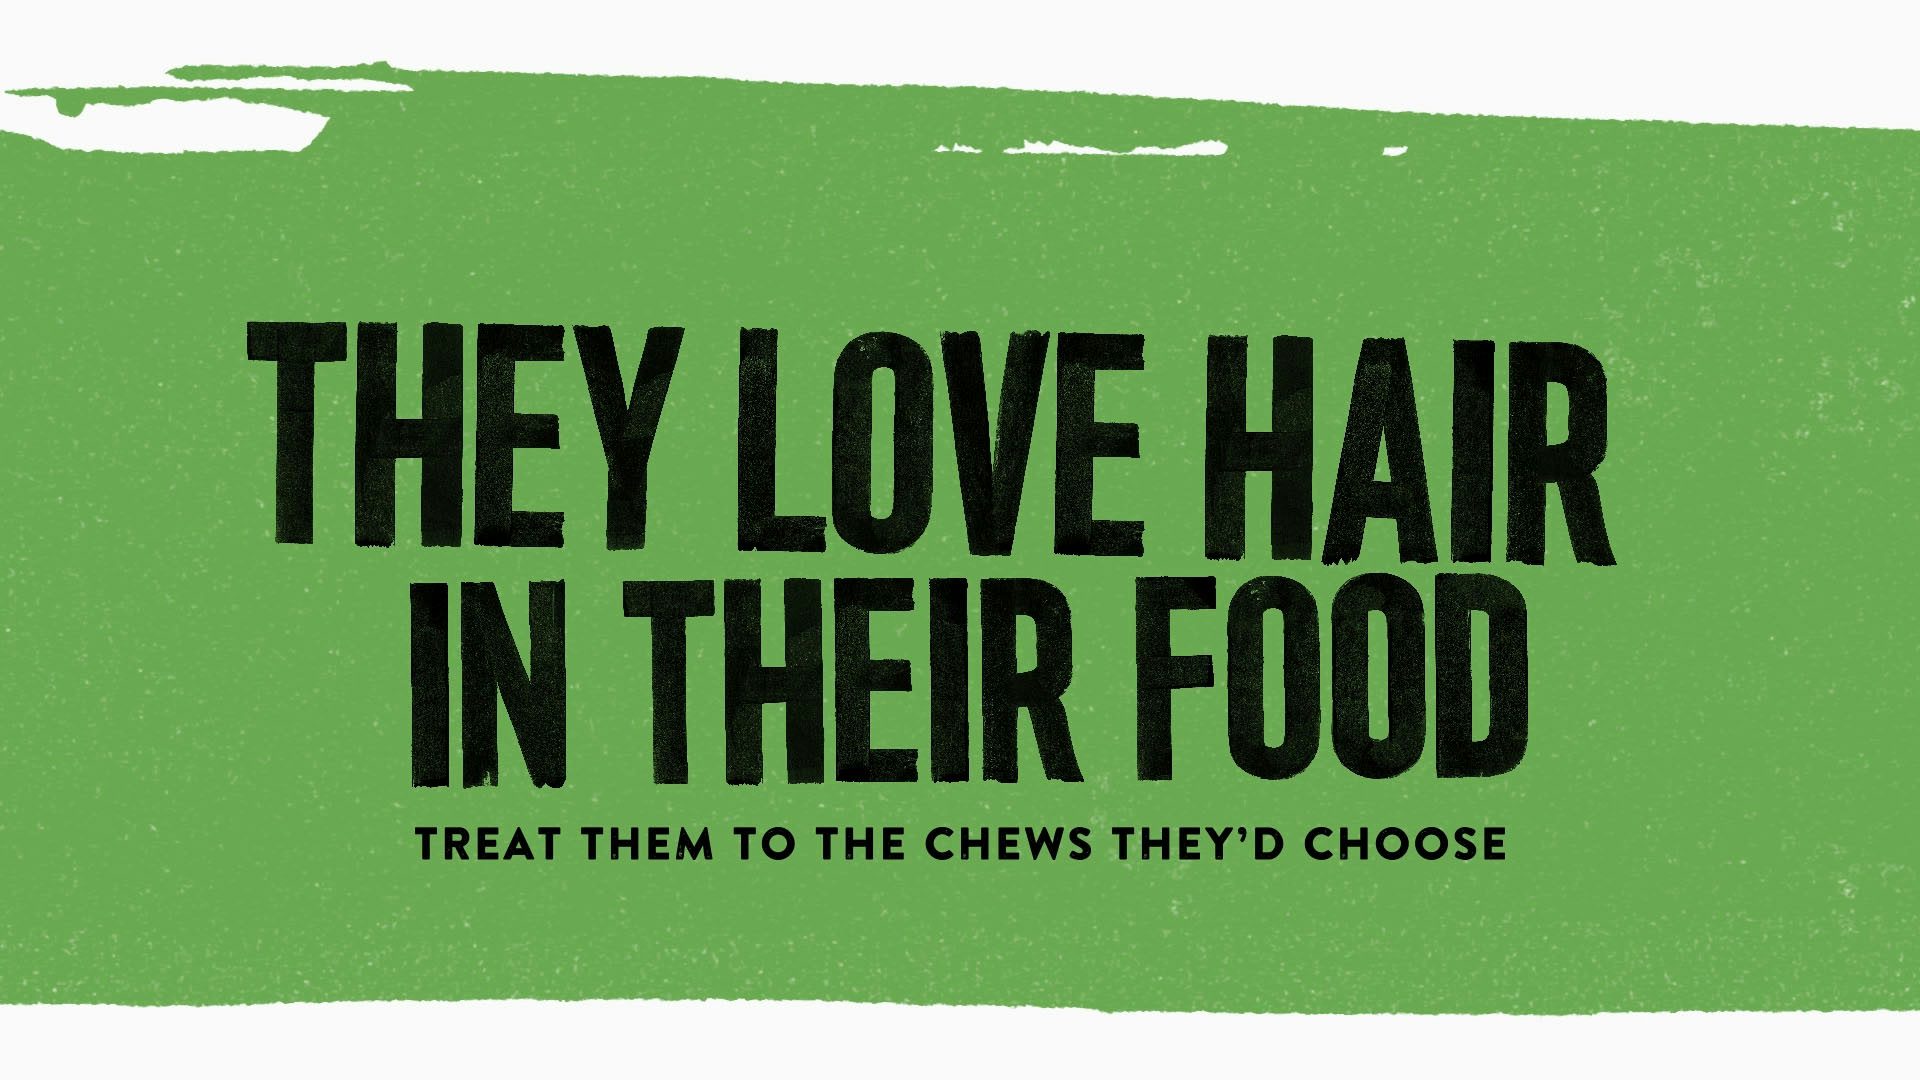 Image shows black block capital letters that read 'They love hair in their food' against a green background, featuring NAW's branding by Robot Food